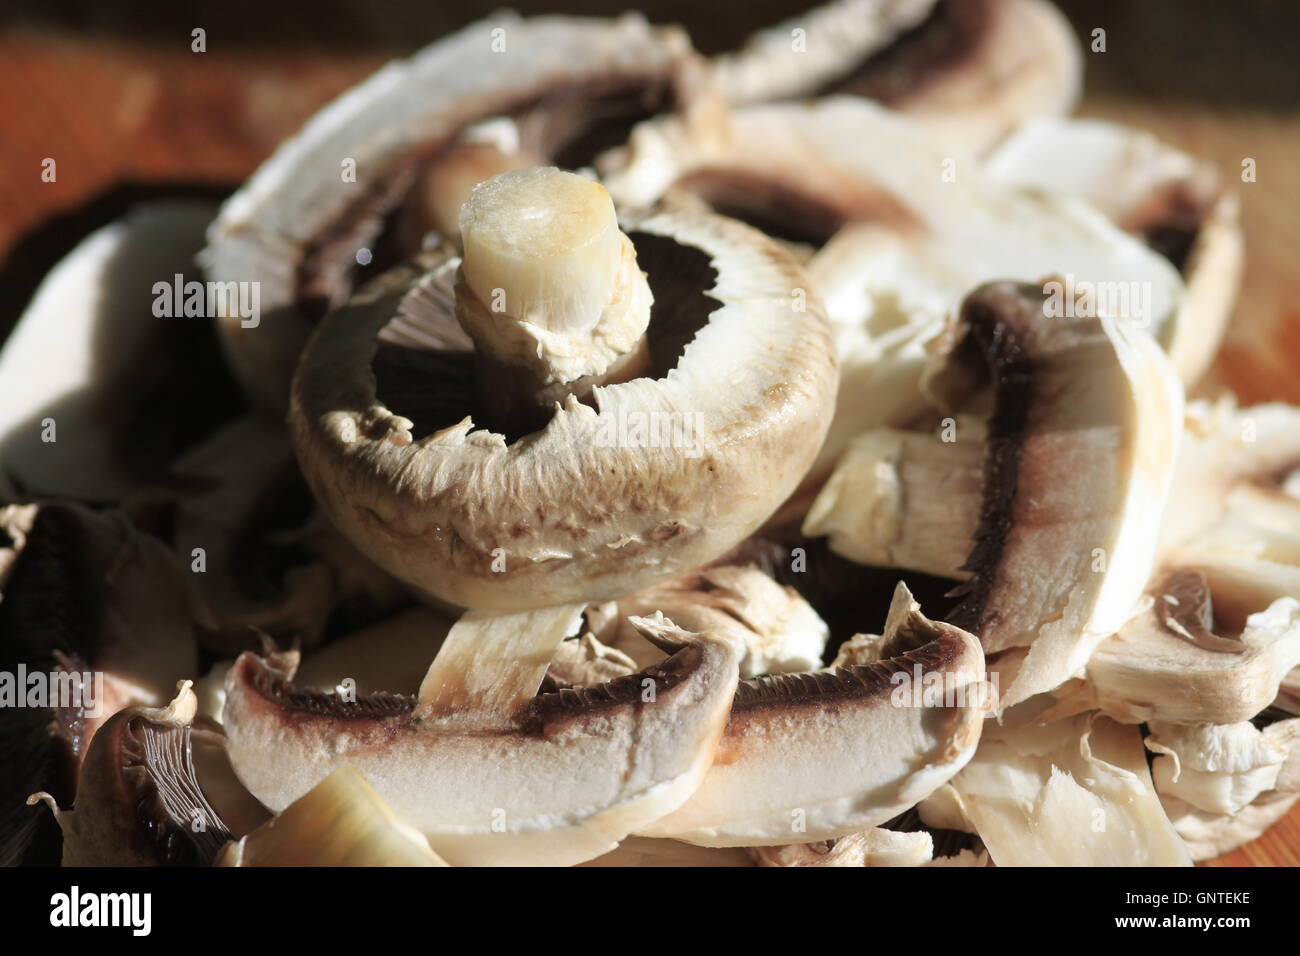 Food preparation - white mushrooms on wooden kitchen worktop waiting to be cooked. Close up of mushroom gills. Stock Photo